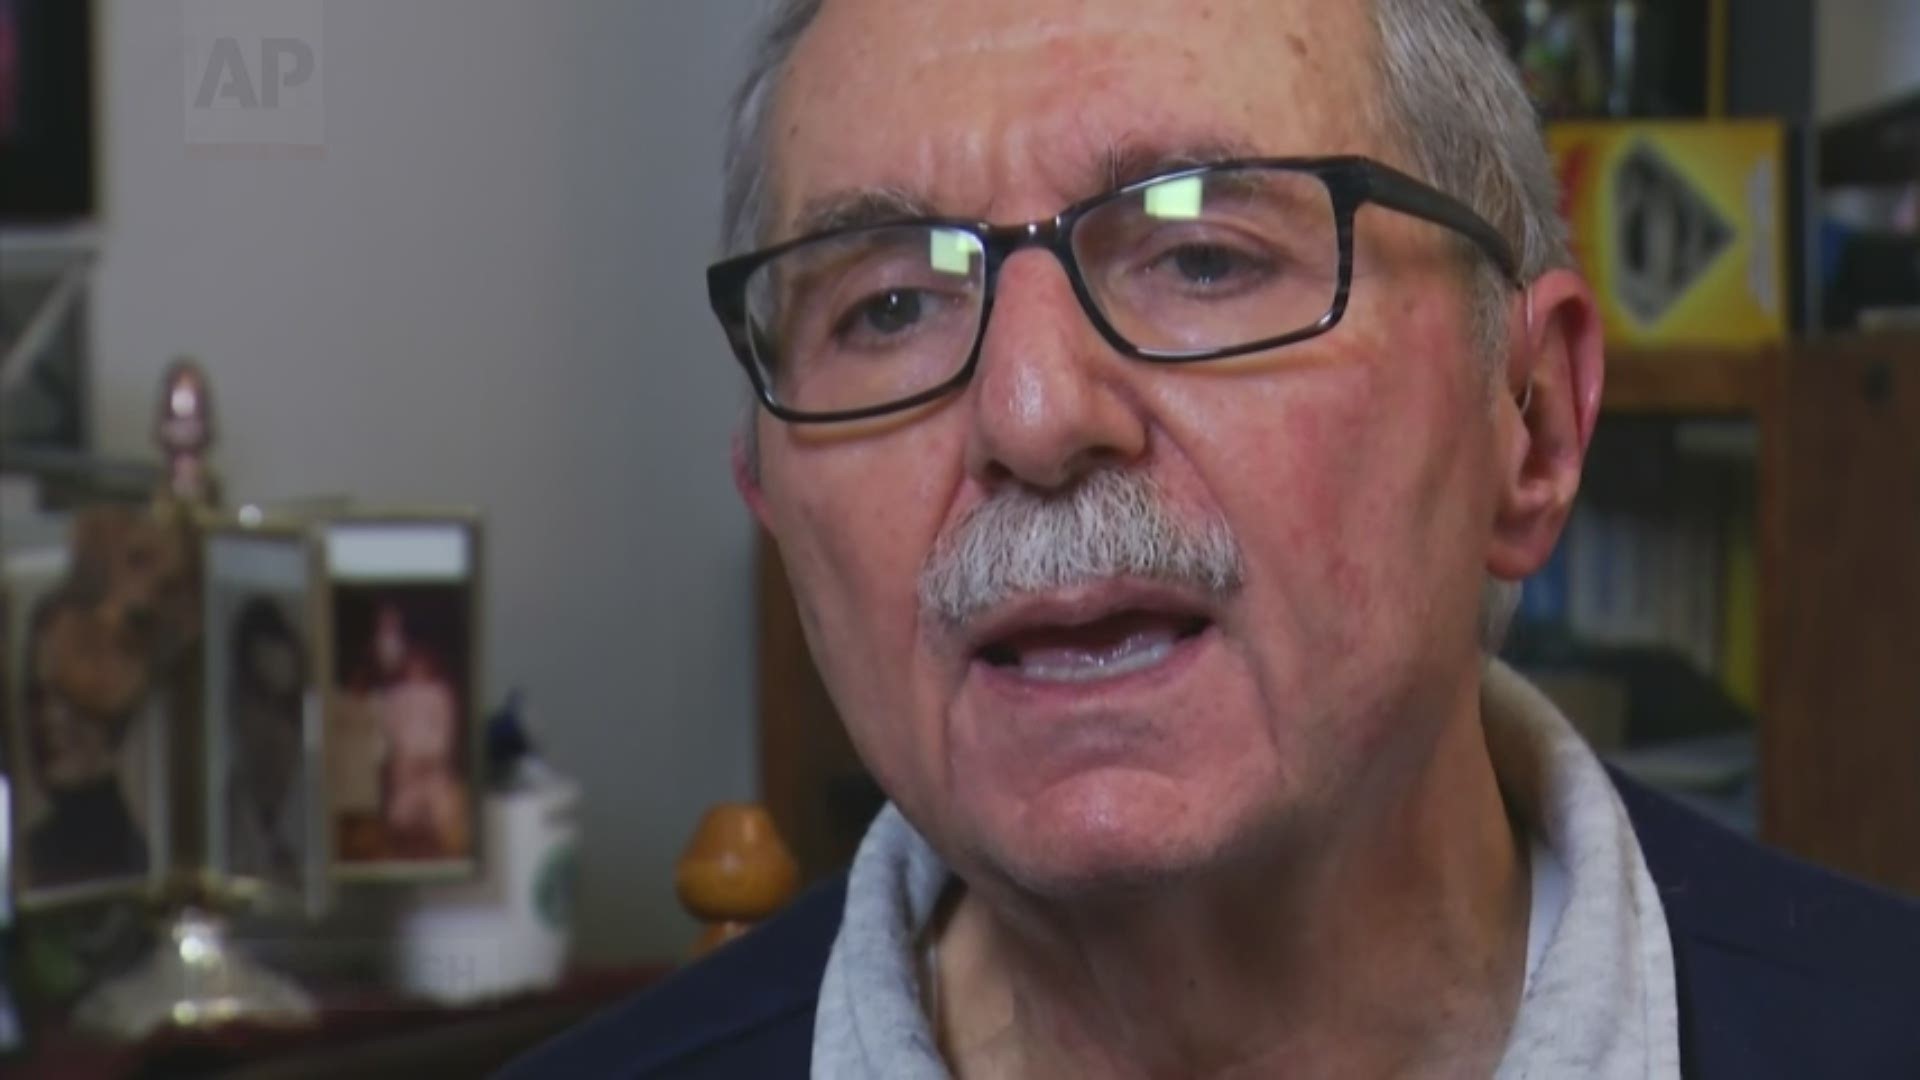 Synagogue shooting survivor Barry Werber, 76, describes his friend being shot dead in front of him and how he survived the synagogue attack. He hopes Trump does not visit Pittsburgh because he "has no use for him." (AP)